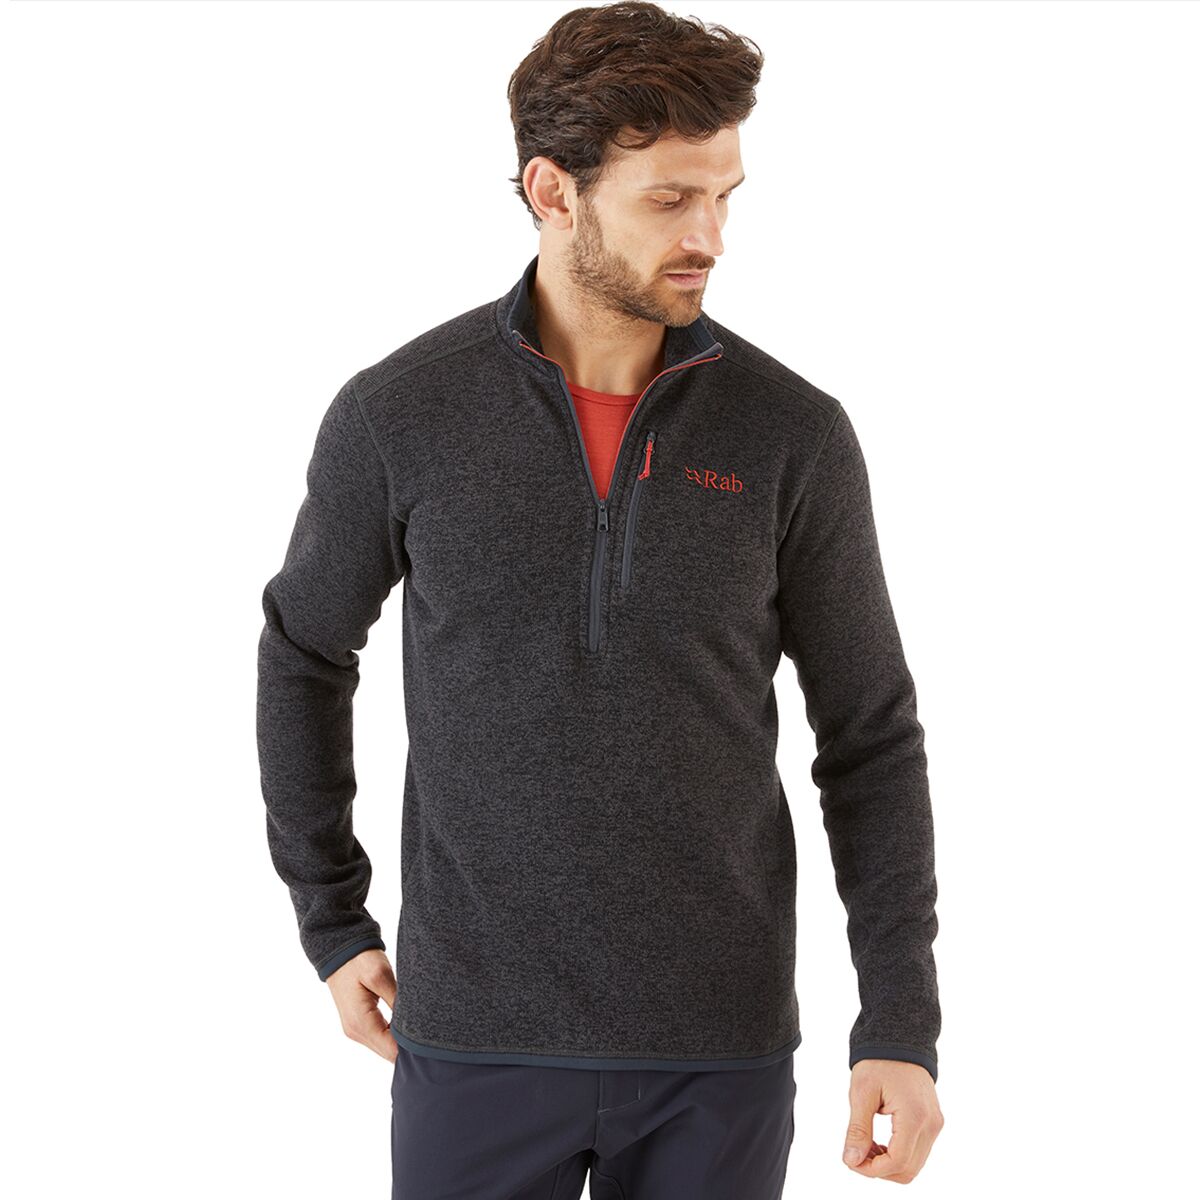 Rab Quest Pull-On Jacket - Men's